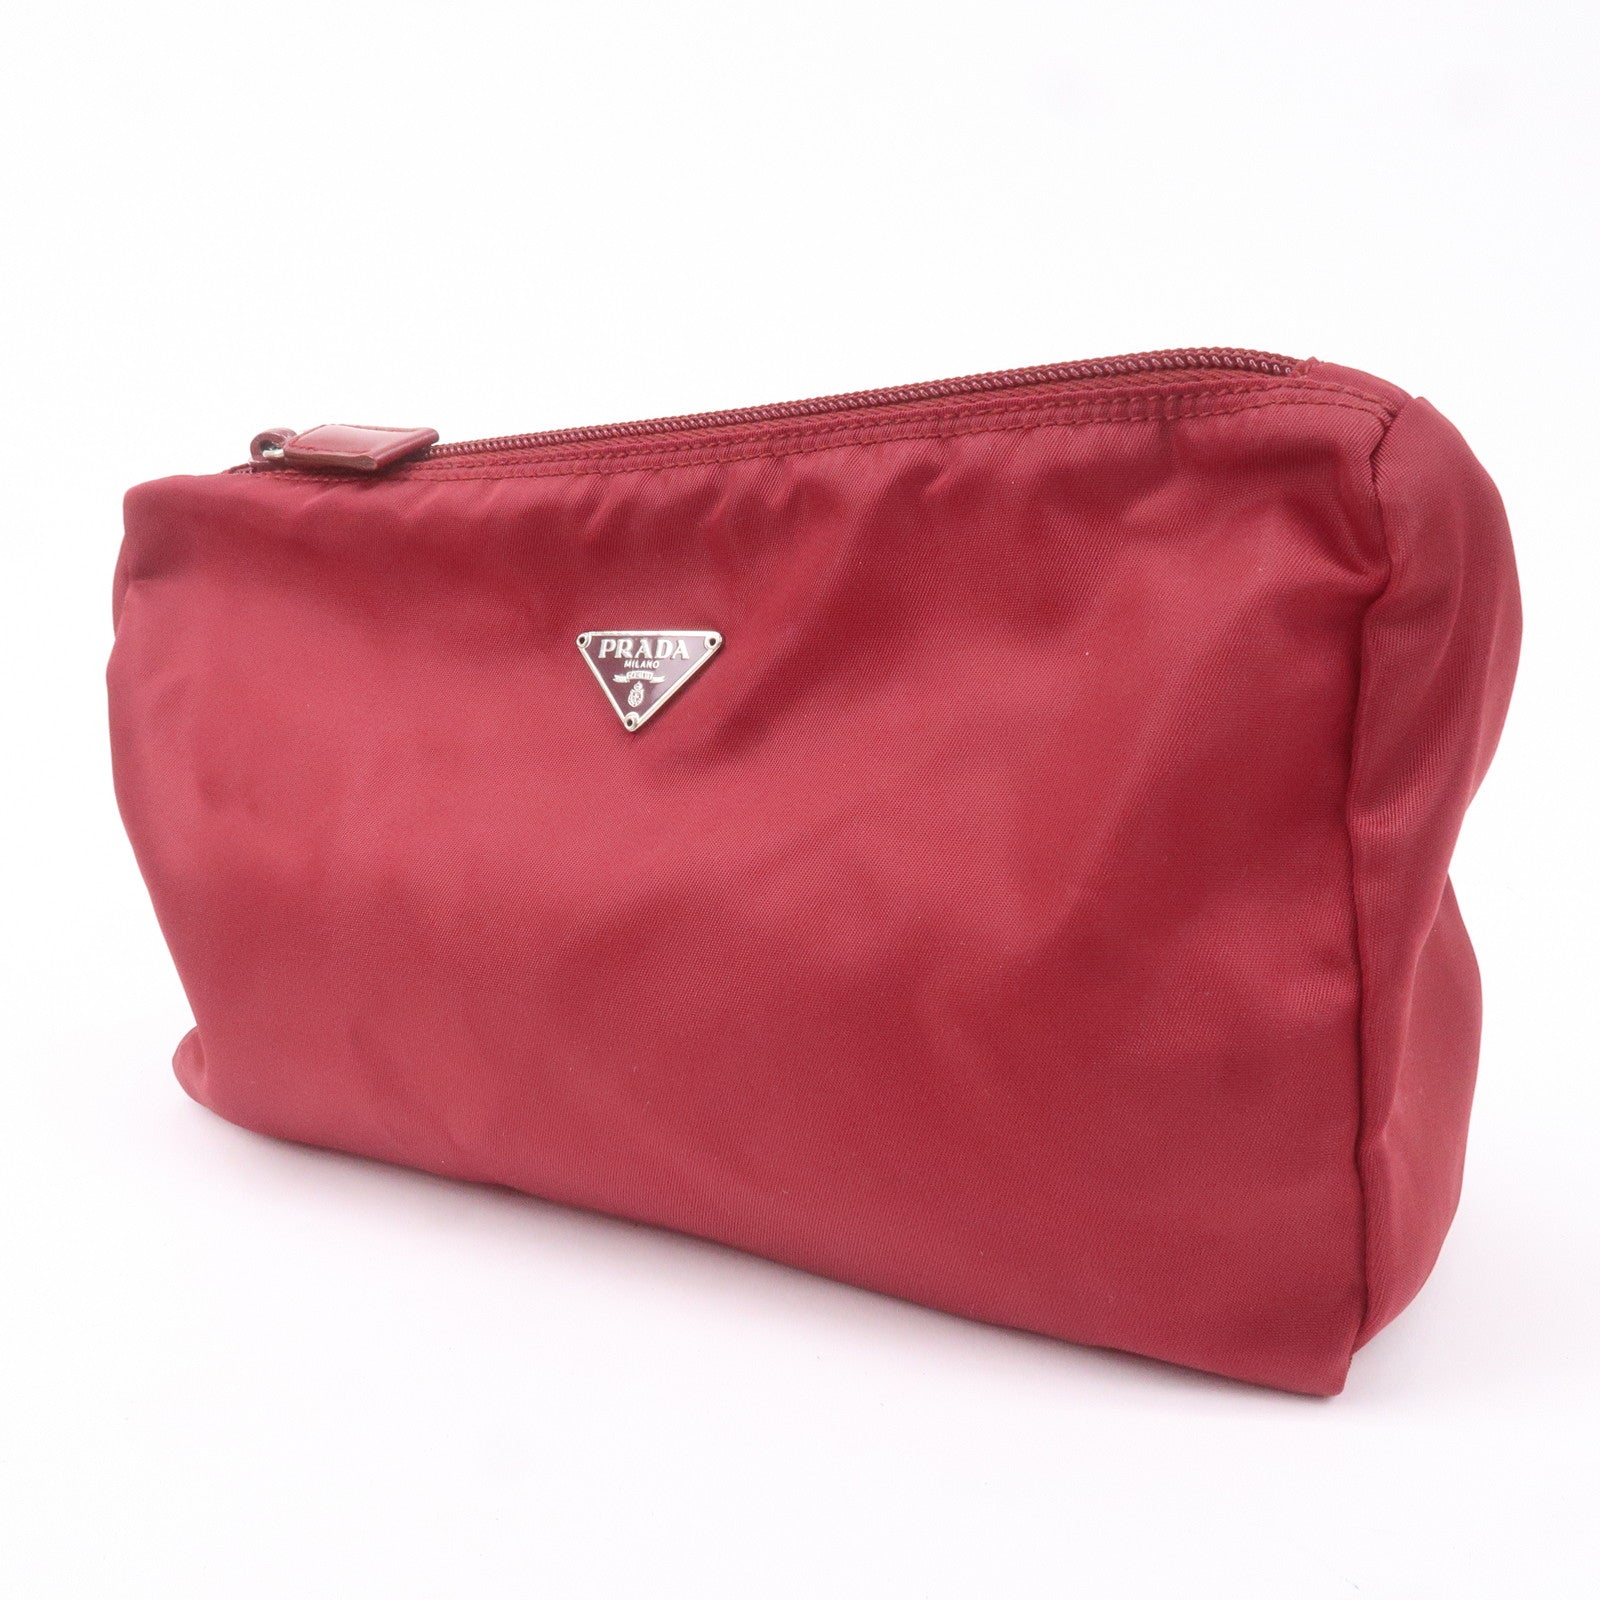 Luxury black and red leather toiletry bag